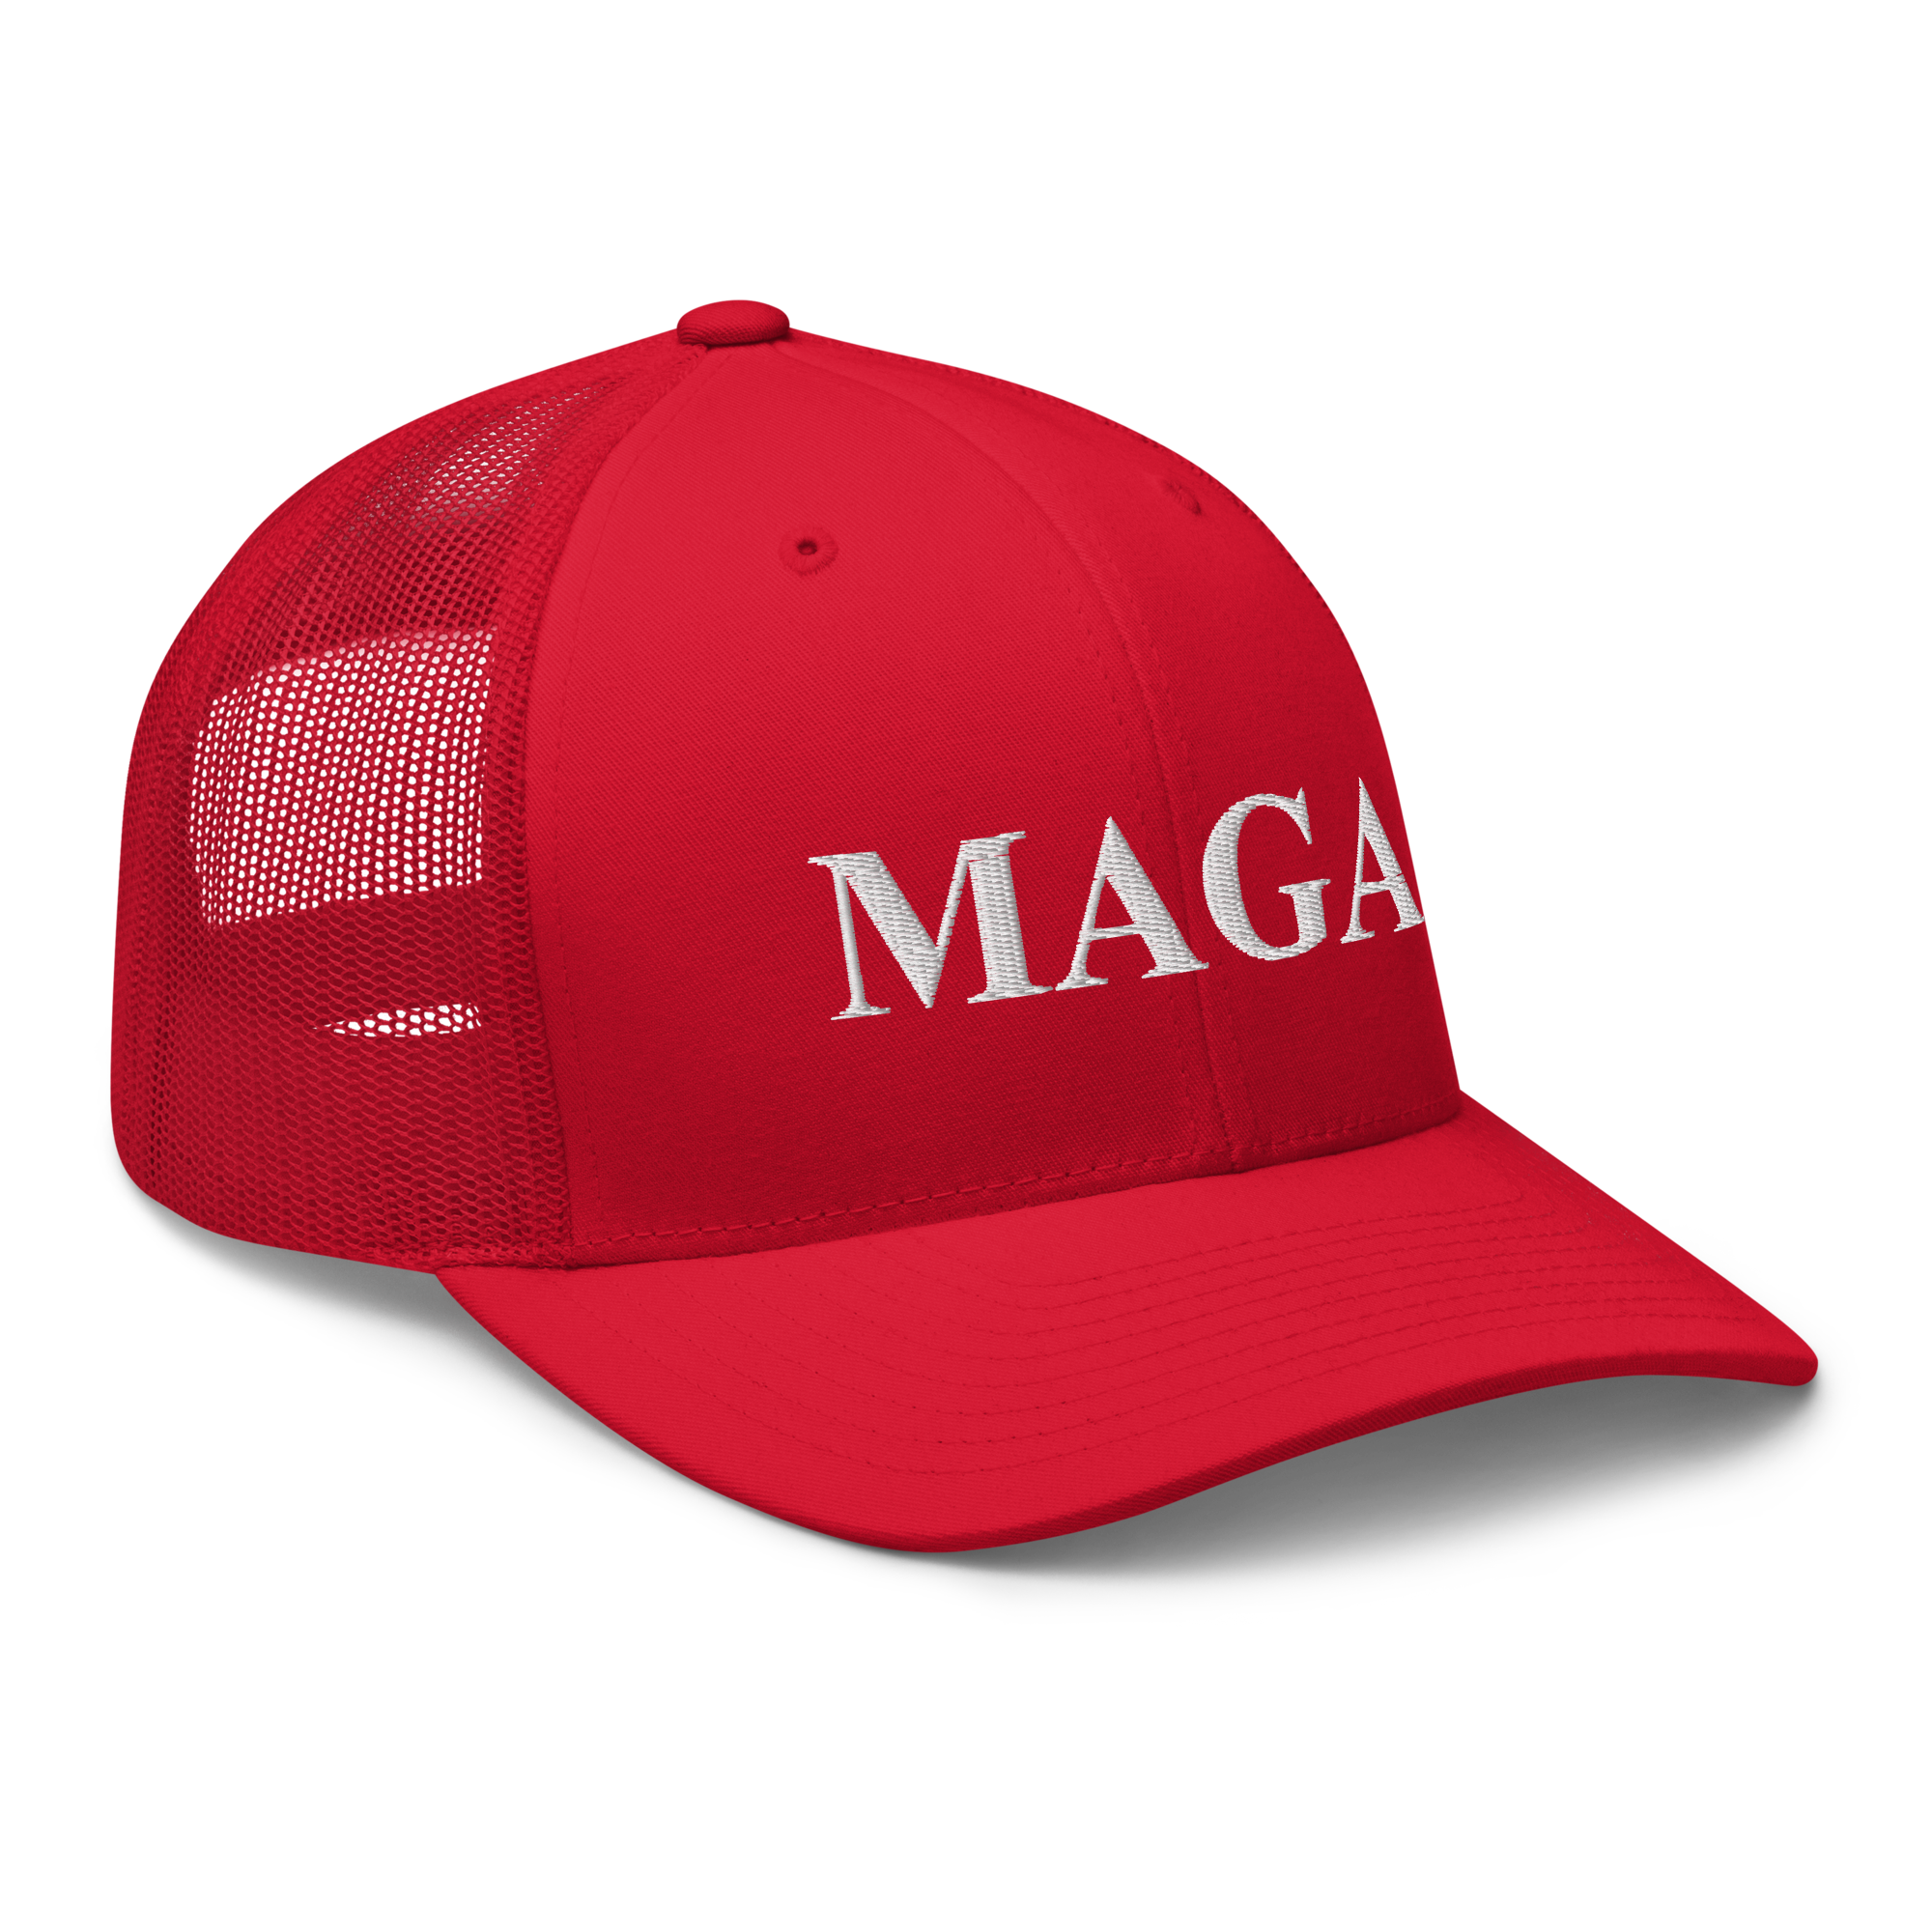 MAGA Trucker Hat - Red OS - Loyalty Vibes